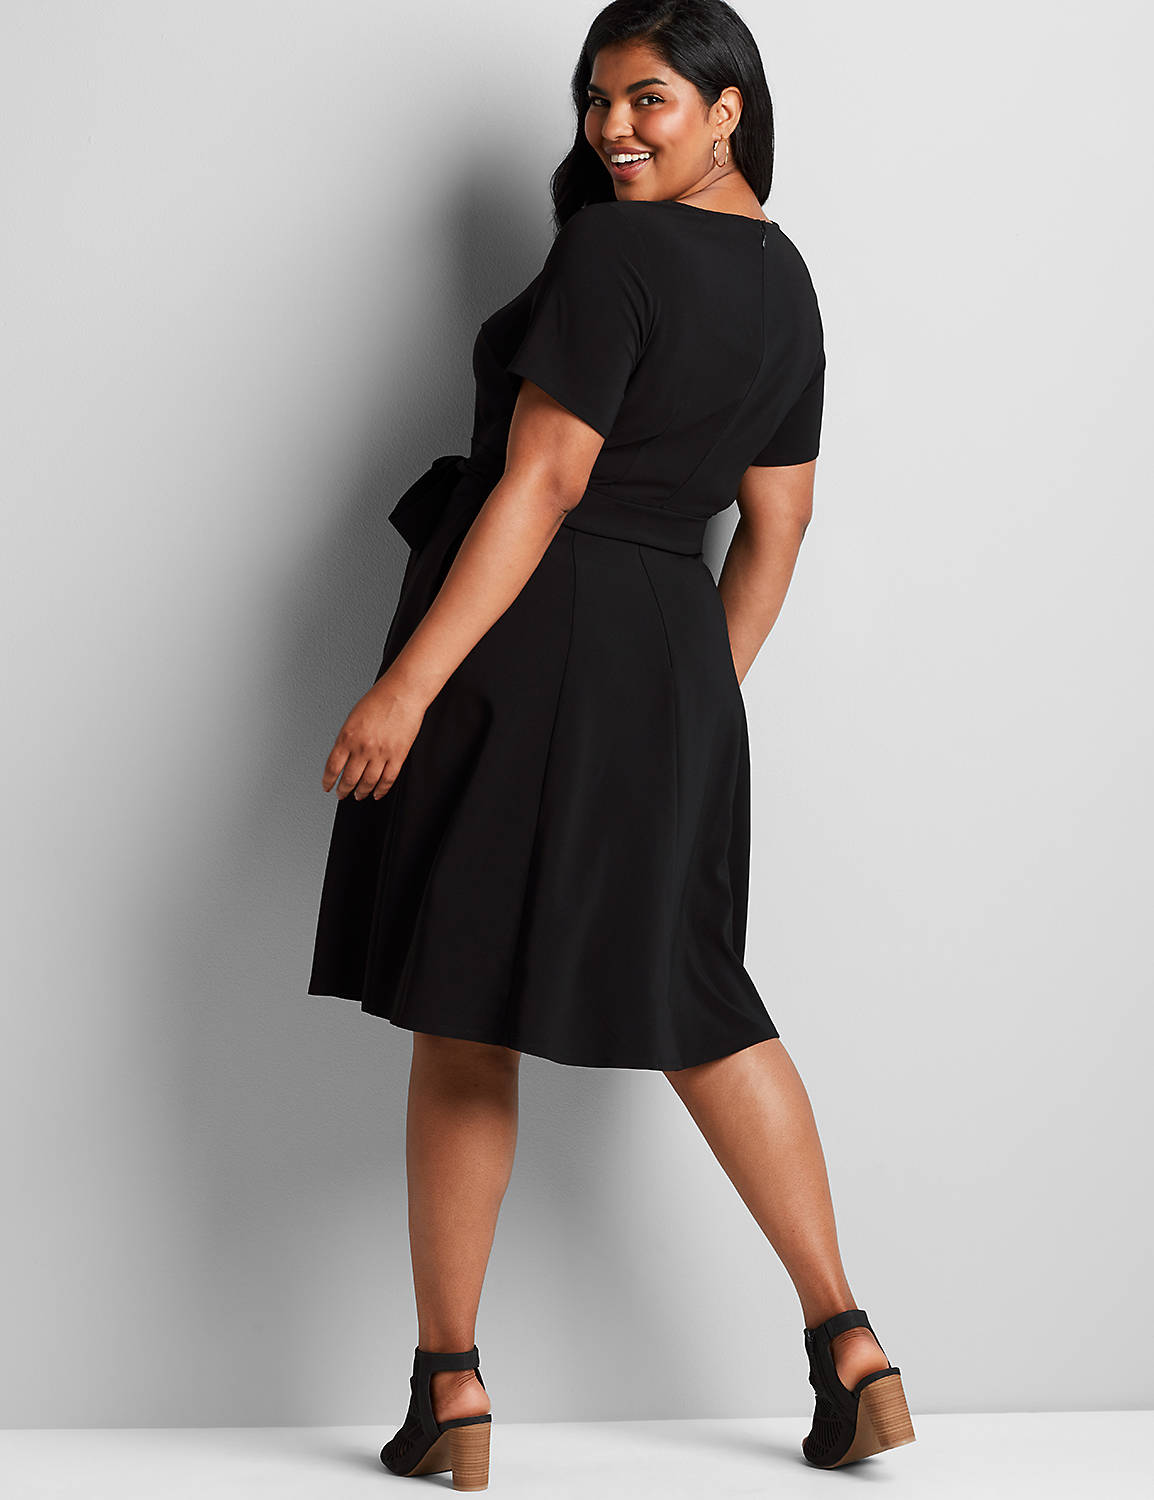 1113886- Lena Short Sleeve Square Neck Fit and Flare Dress:Pitch Black LB 1000322:12 Product Image 2